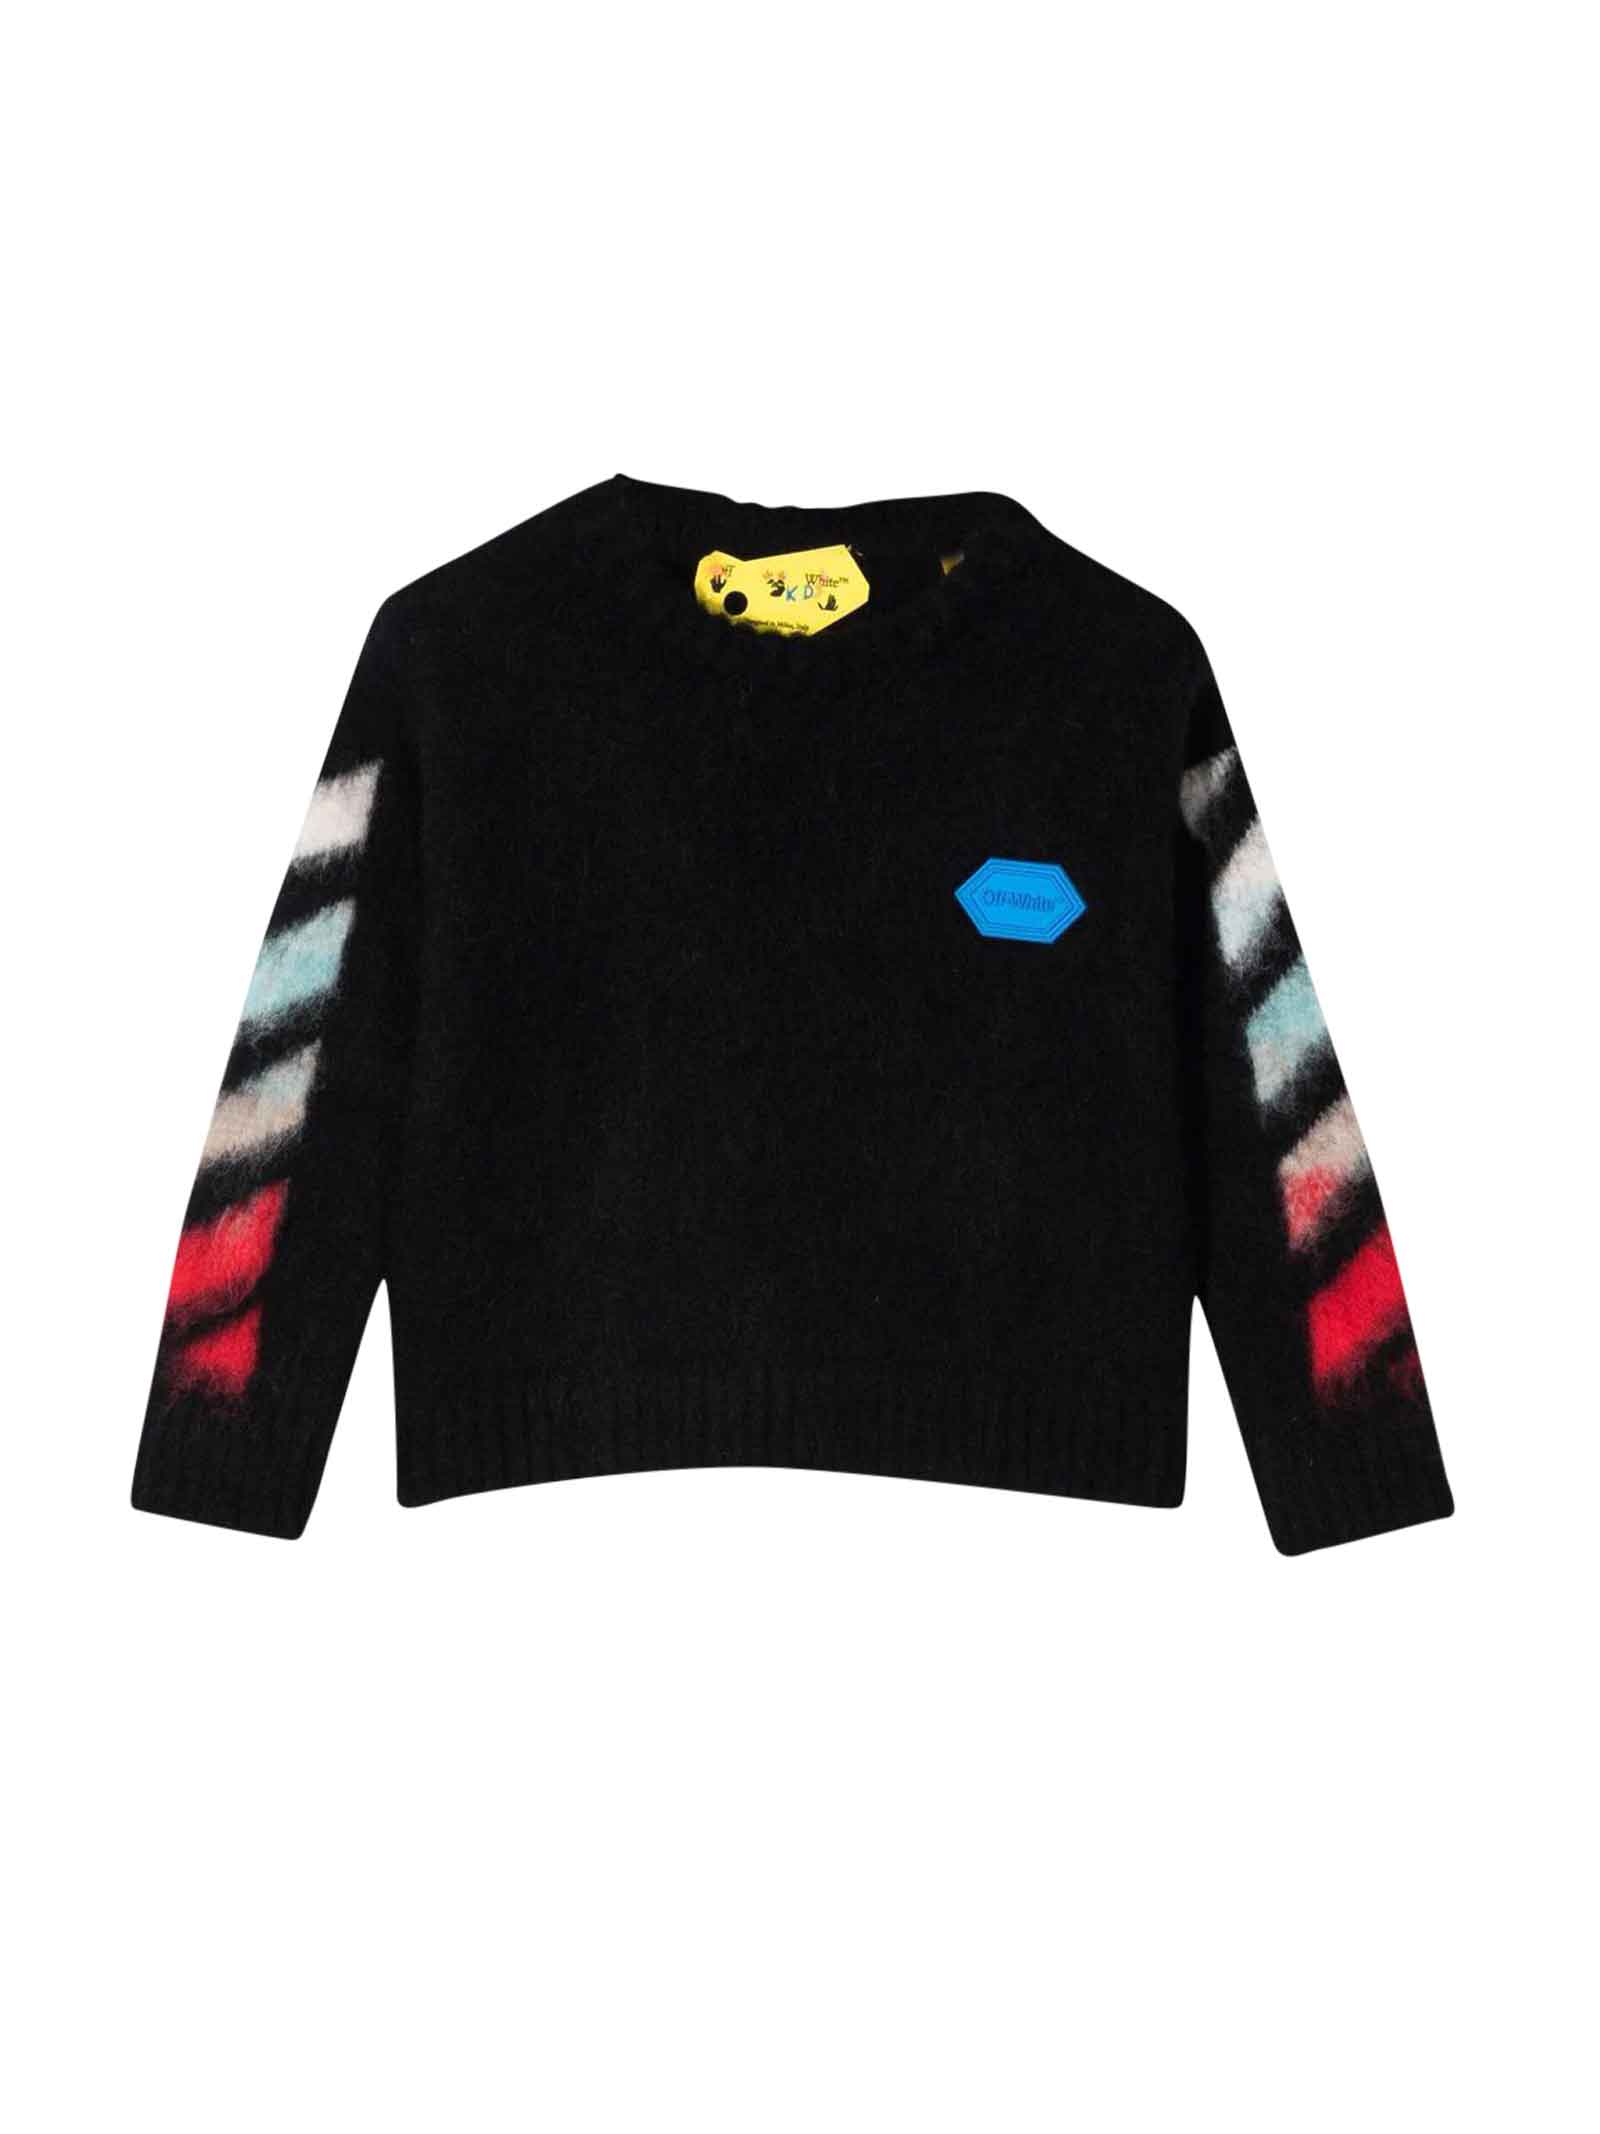 Off-White Black Shirt With Multicolor Print